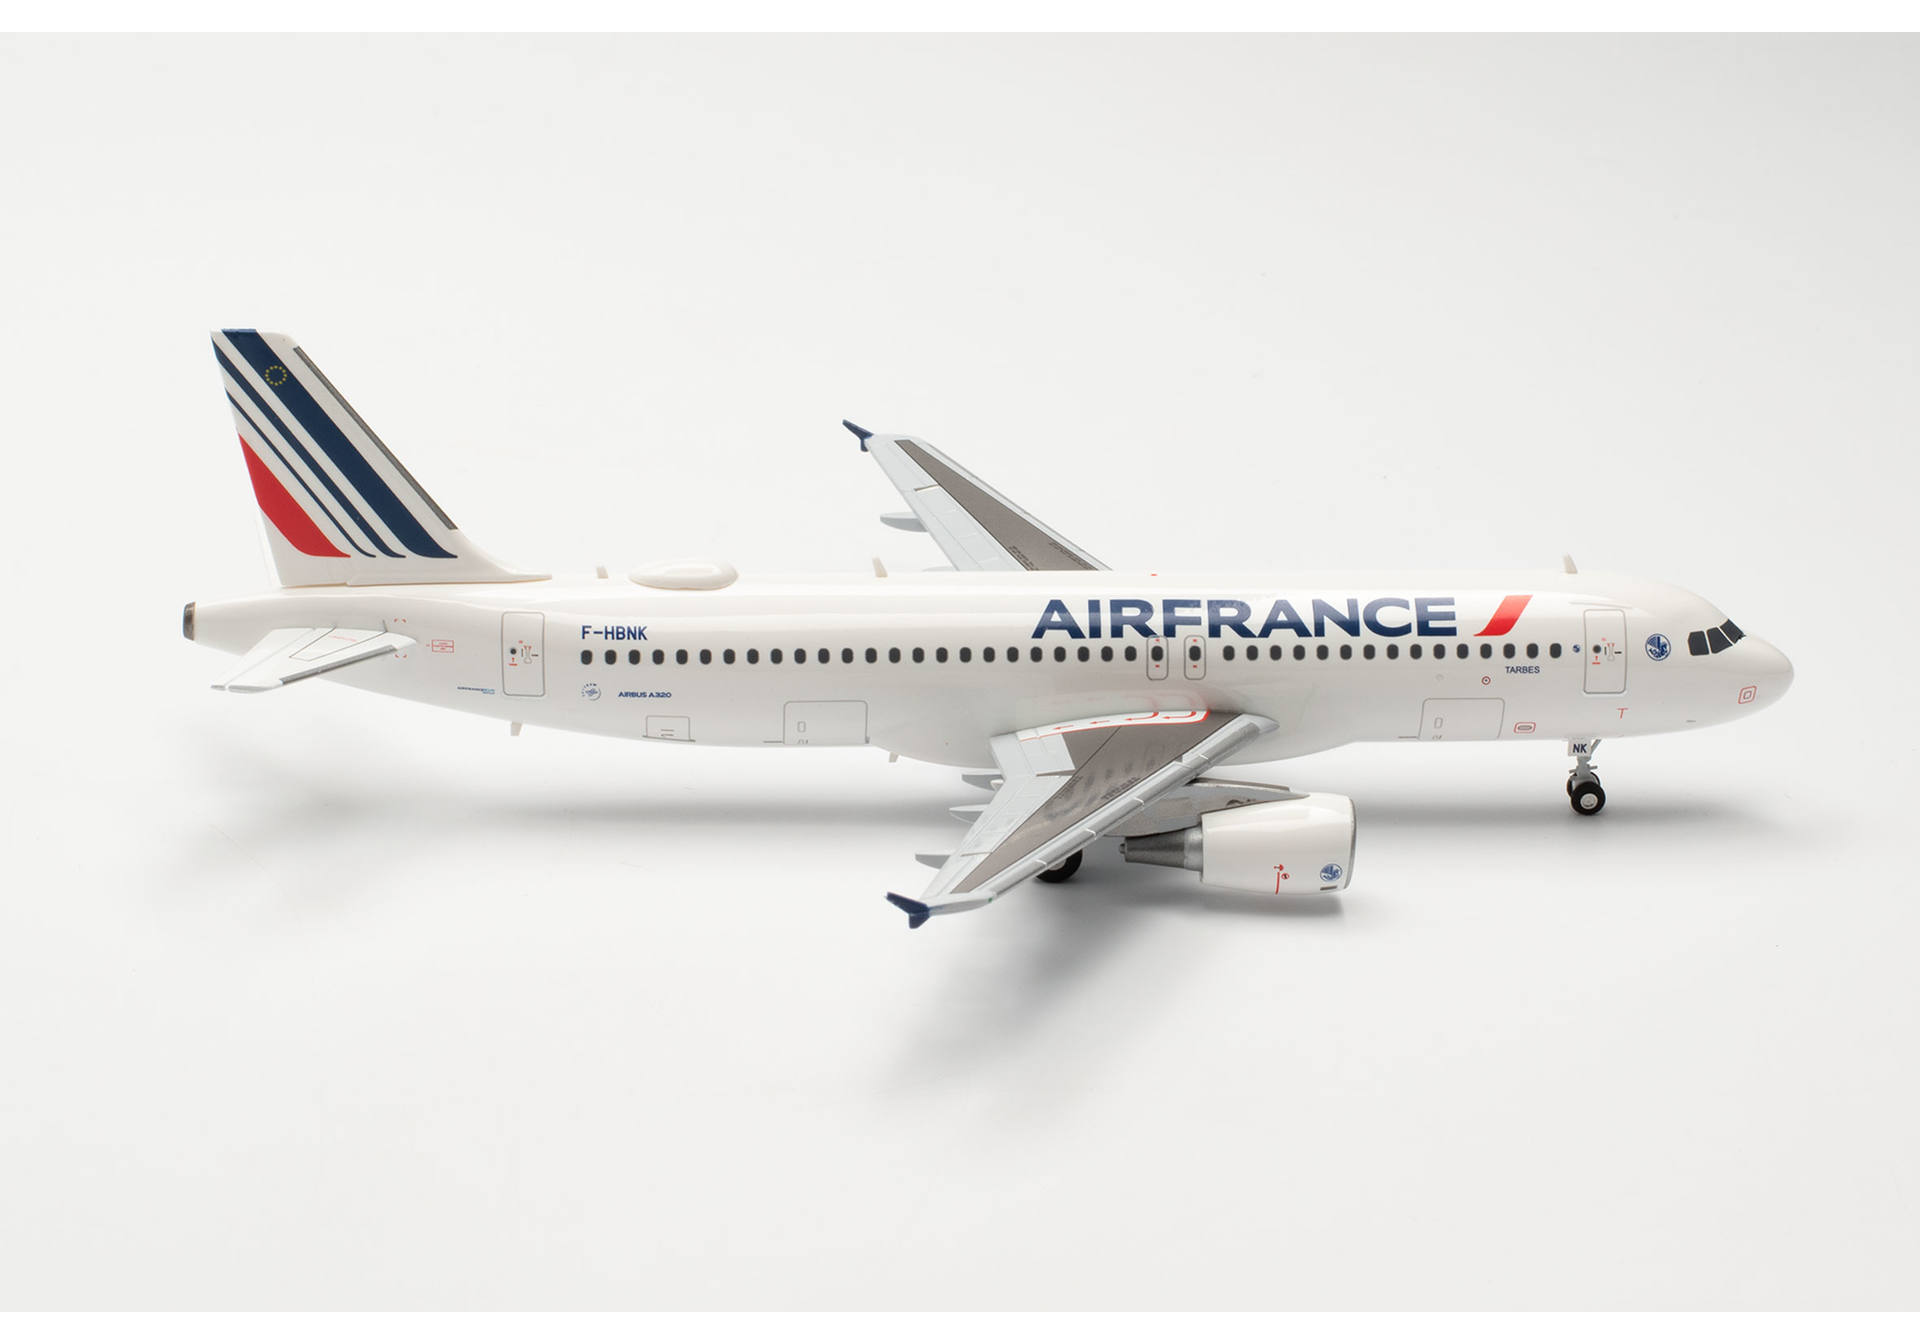 Air France Airbus A320 – new 2021 livery – F-HBNK “Tarbes”